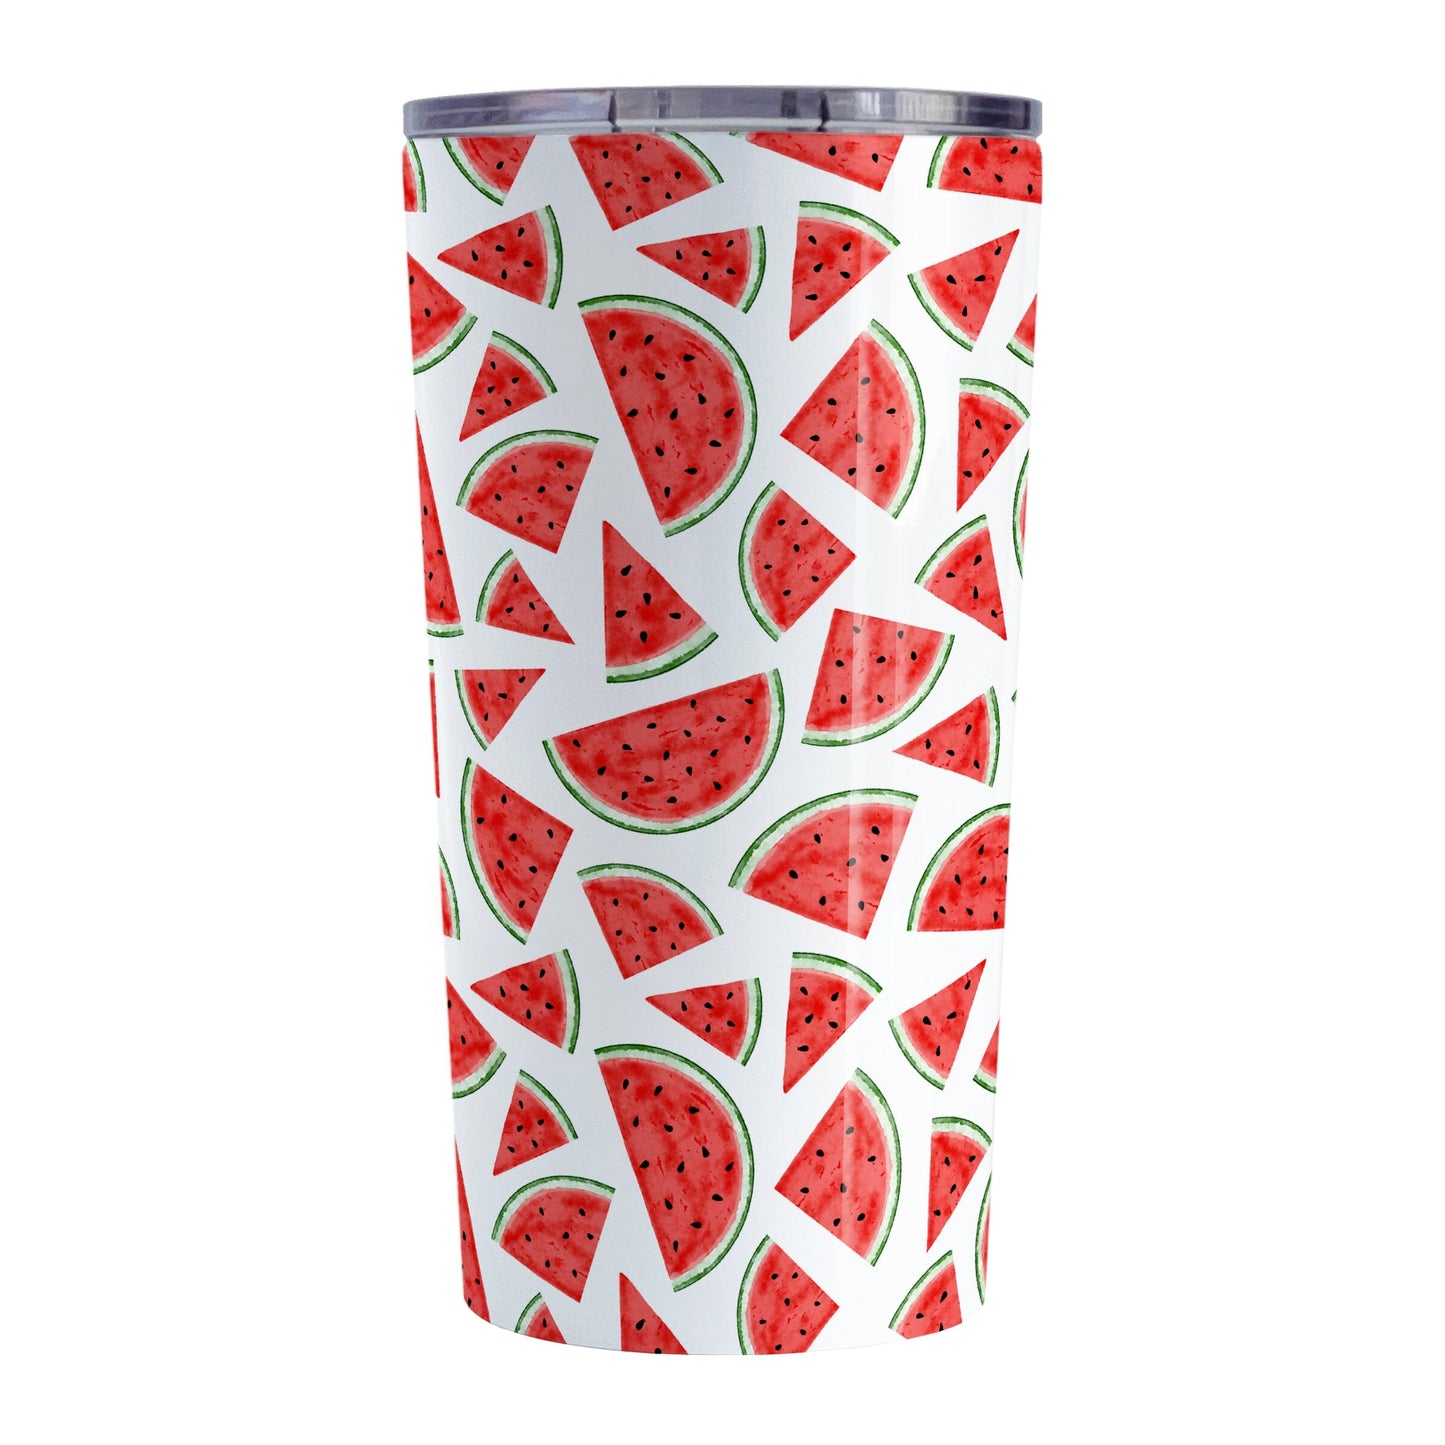 Watermelon Slices Tumbler Cup (20oz) at Amy's Coffee Mugs. A stainless steel tumbler cup with a sipping lid designed with a pattern of illustrated watermelon slices that wraps around the cup.